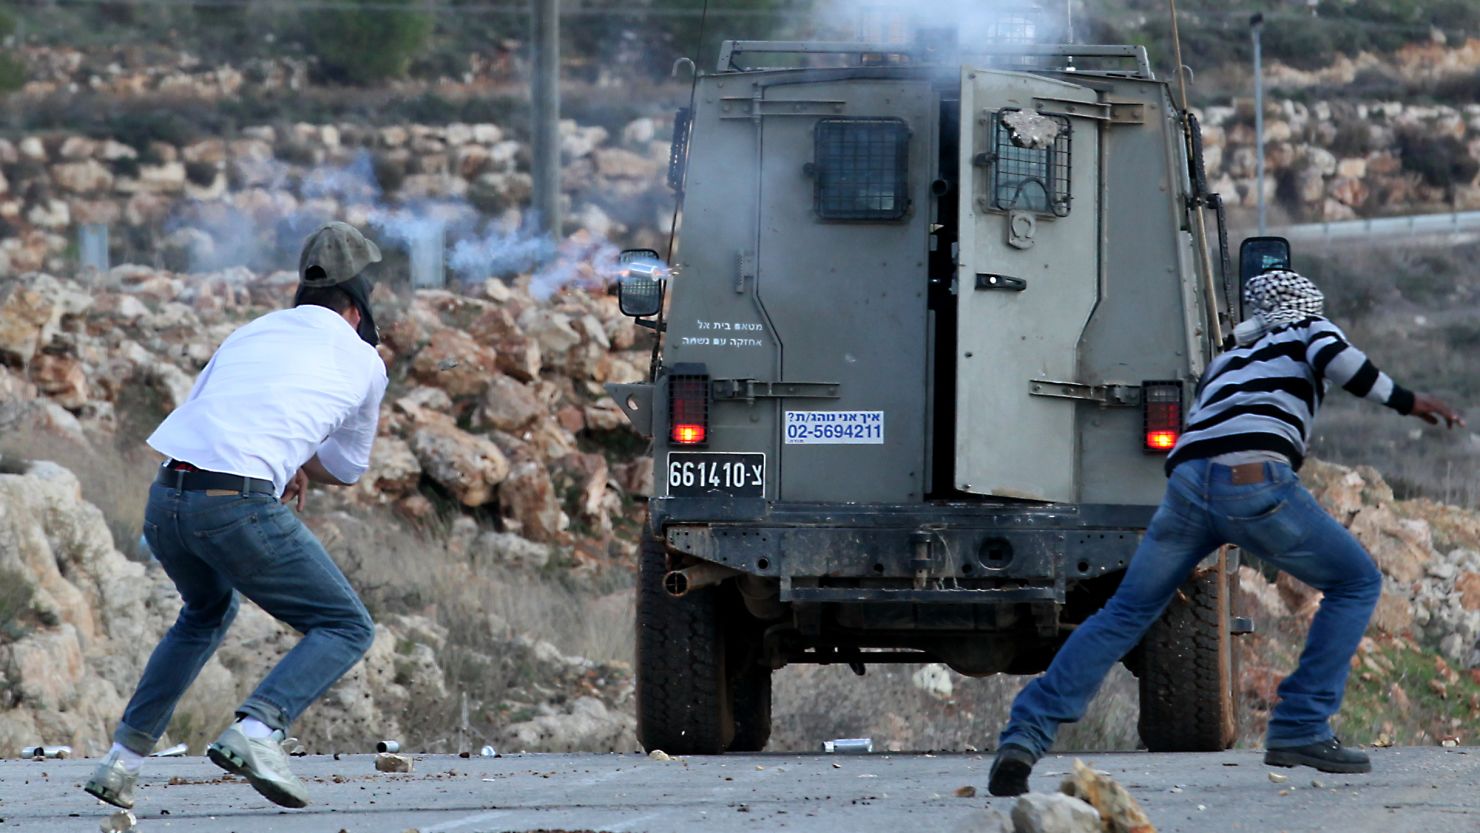 An Active Stills photo shows a tear gas canister being fired by Israeli troops toward Palestinian protester Mustafa Tamimi, left.